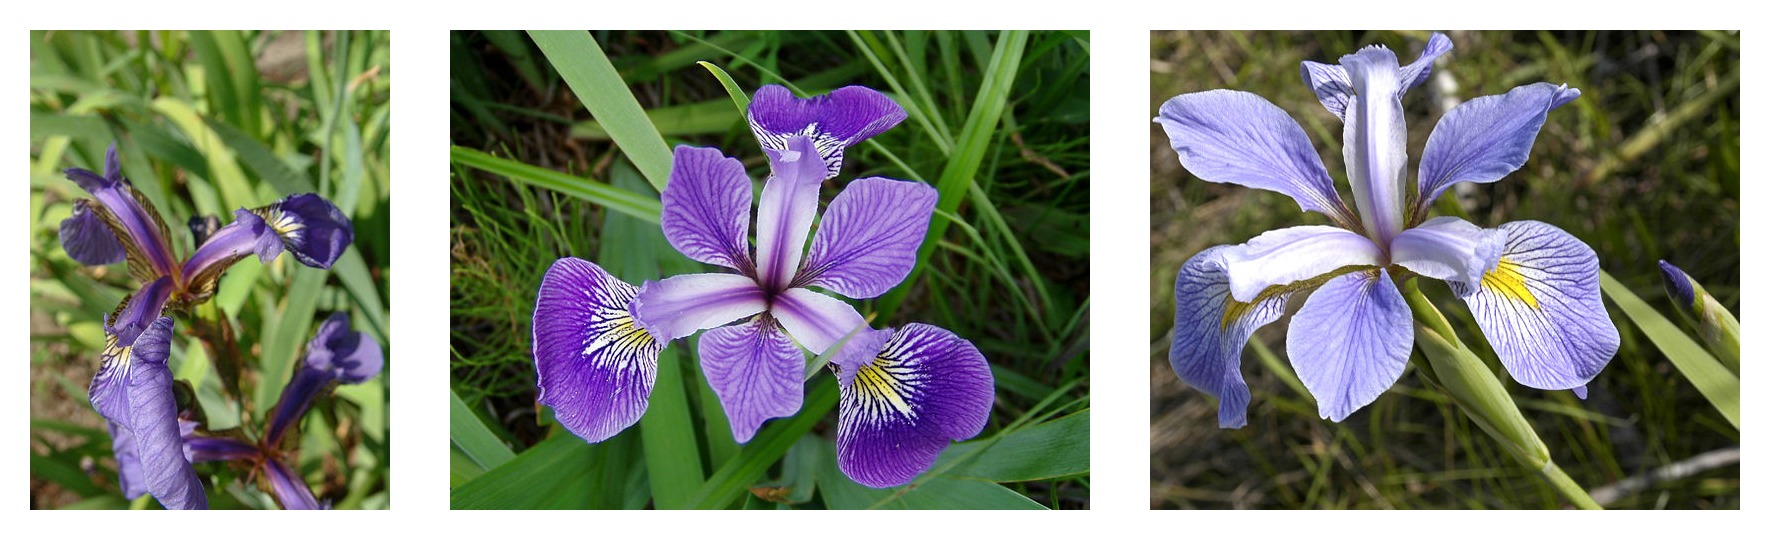 From left to right, Iris setosa (by Radomil, CC BY-SA 3.0), Iris versicolor (by Dlanglois, CC BY-SA 3.0), and Iris virginica (by Frank Mayfield, CC BY-SA 2.0).